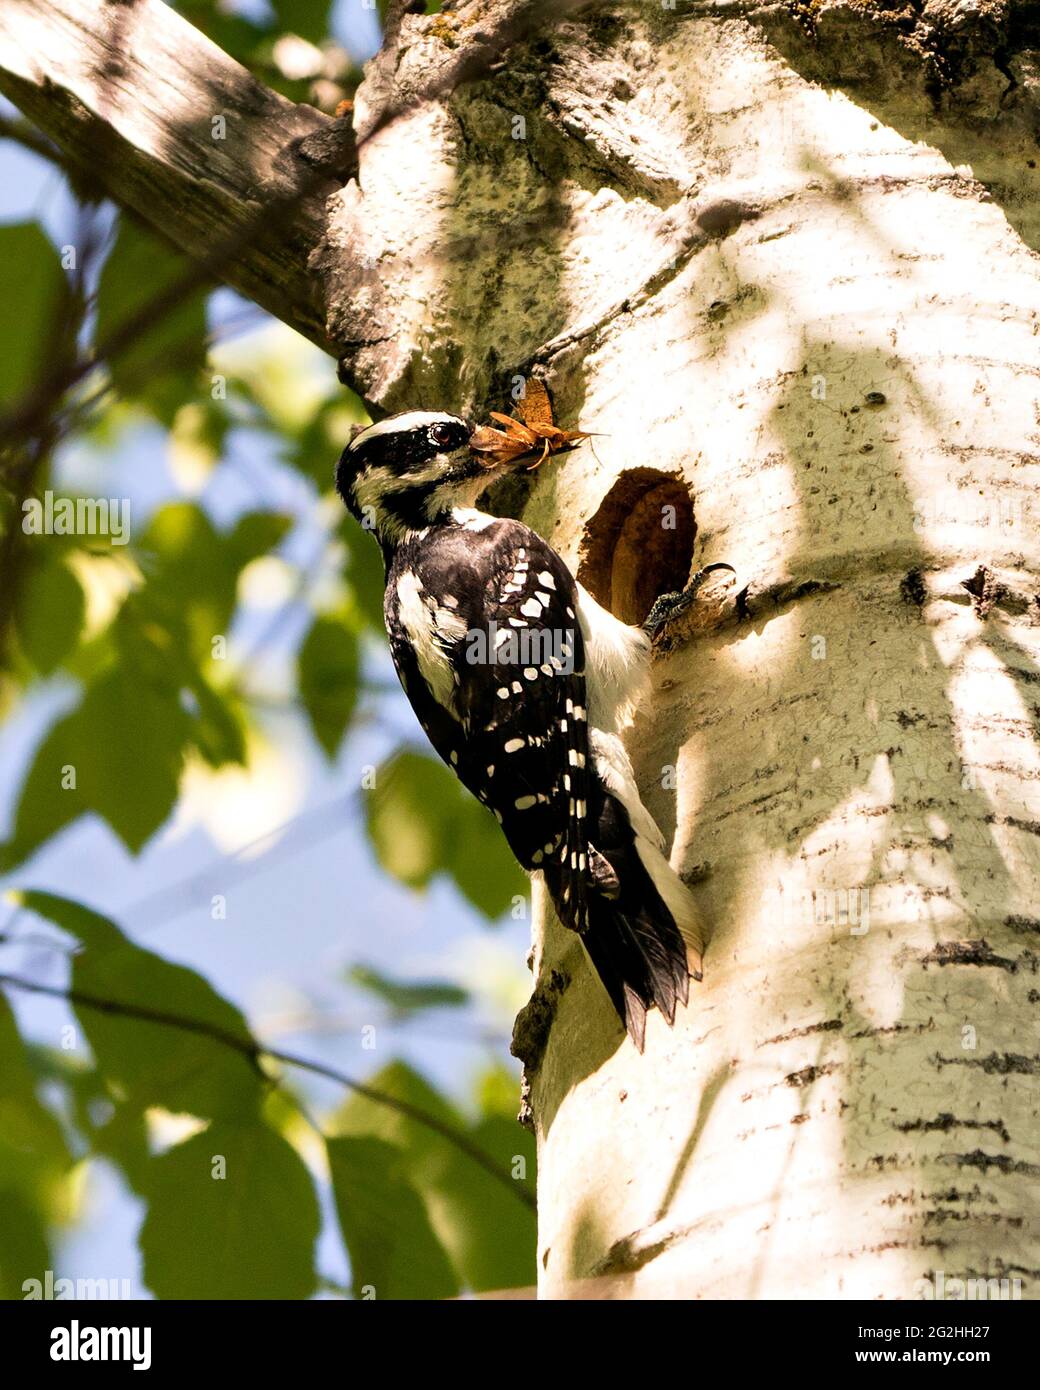 Woodpecker taking food by her nest house in a tree trunk in its environment and habitat. Woodpecker female Hairy Image. Picture. Portrait. Stock Photo